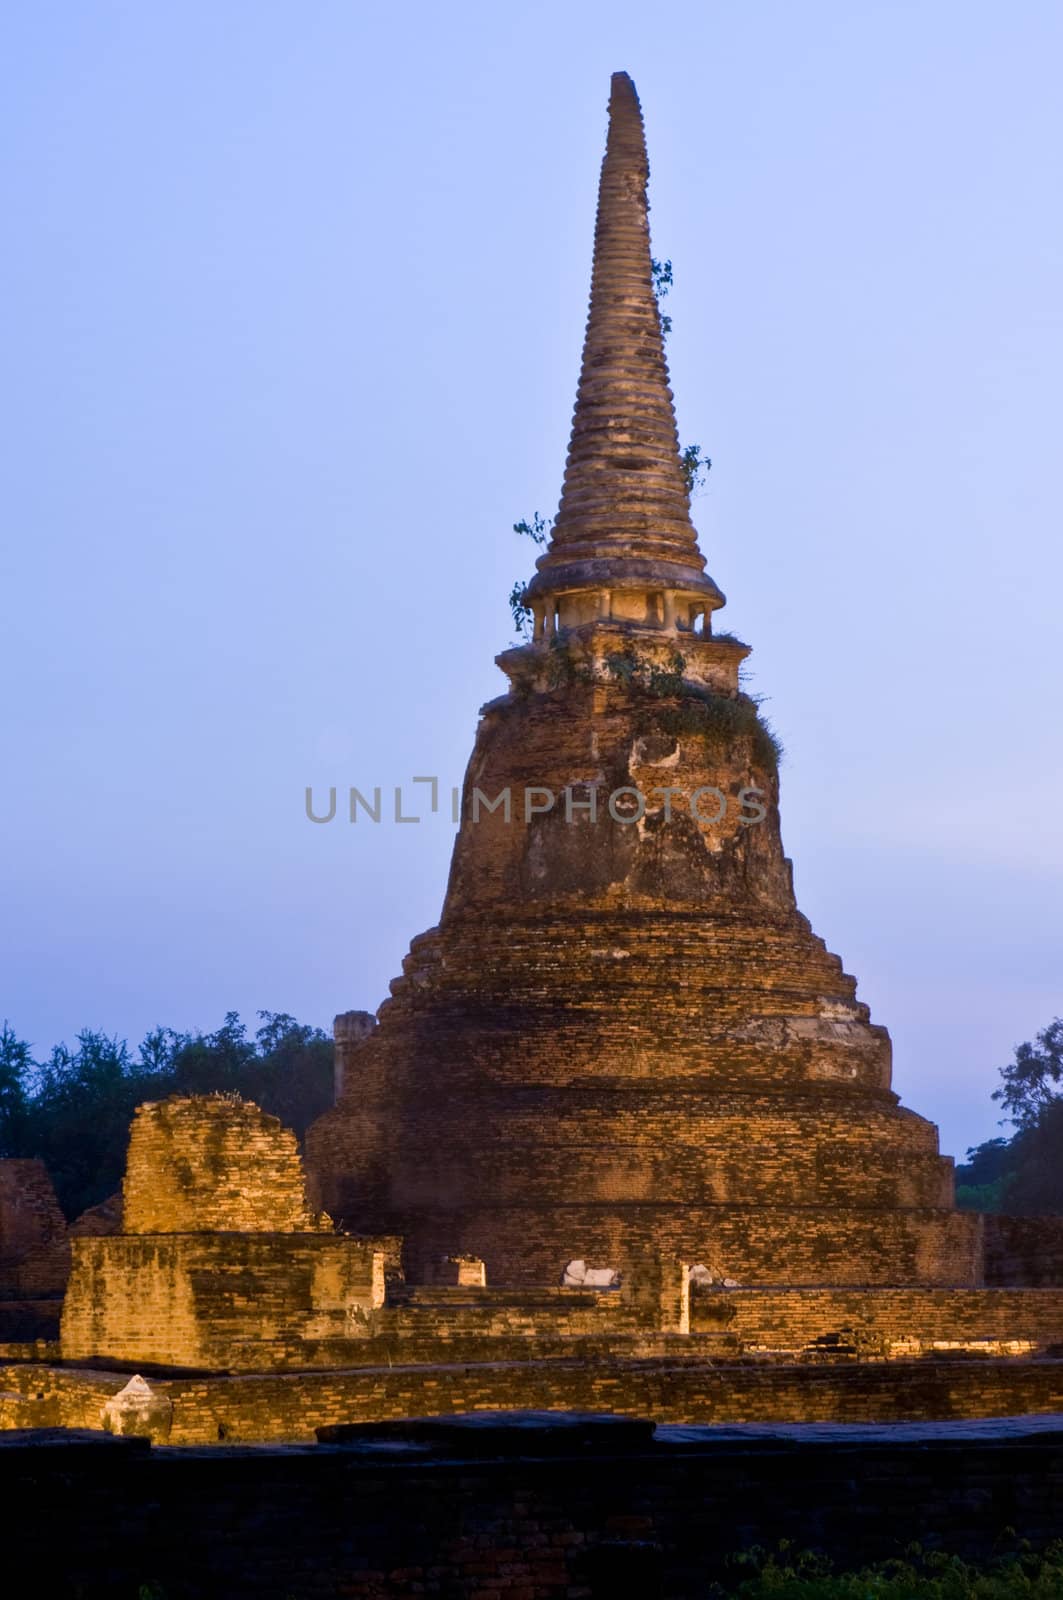 Stupa (chedi) of a Wat in Ayutthaya, Thailand, during the final phase of a sunset. Ayutthaya city is the capital of Ayutthaya province in Thailand. Its historical park is a UNESCO world heritage.